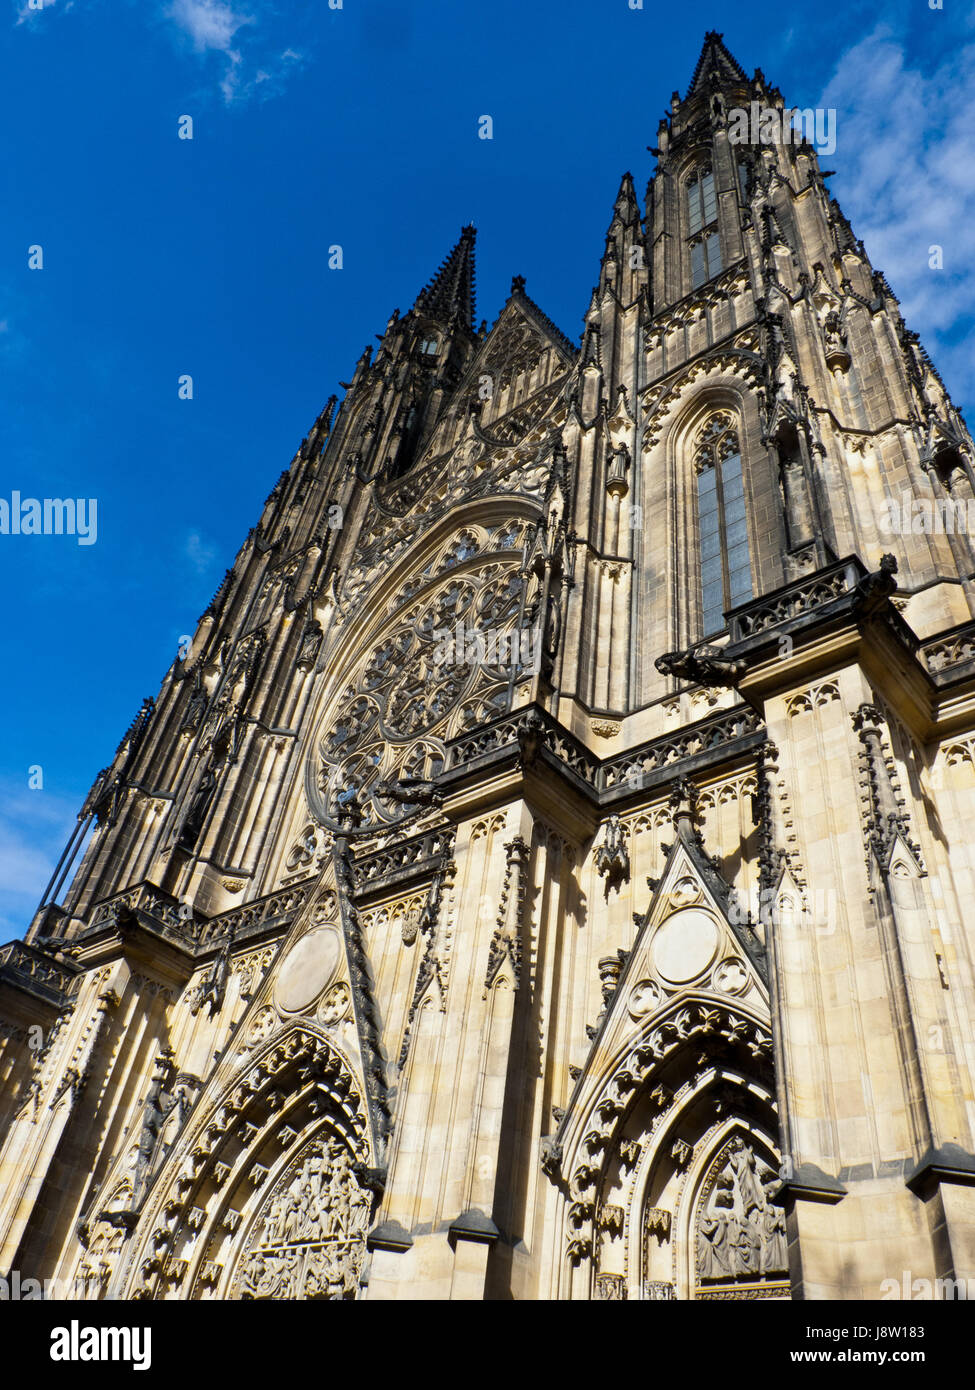 cathedral, prague, blue, cathedral, europe, prague, facade, czechia, firmament, Stock Photo